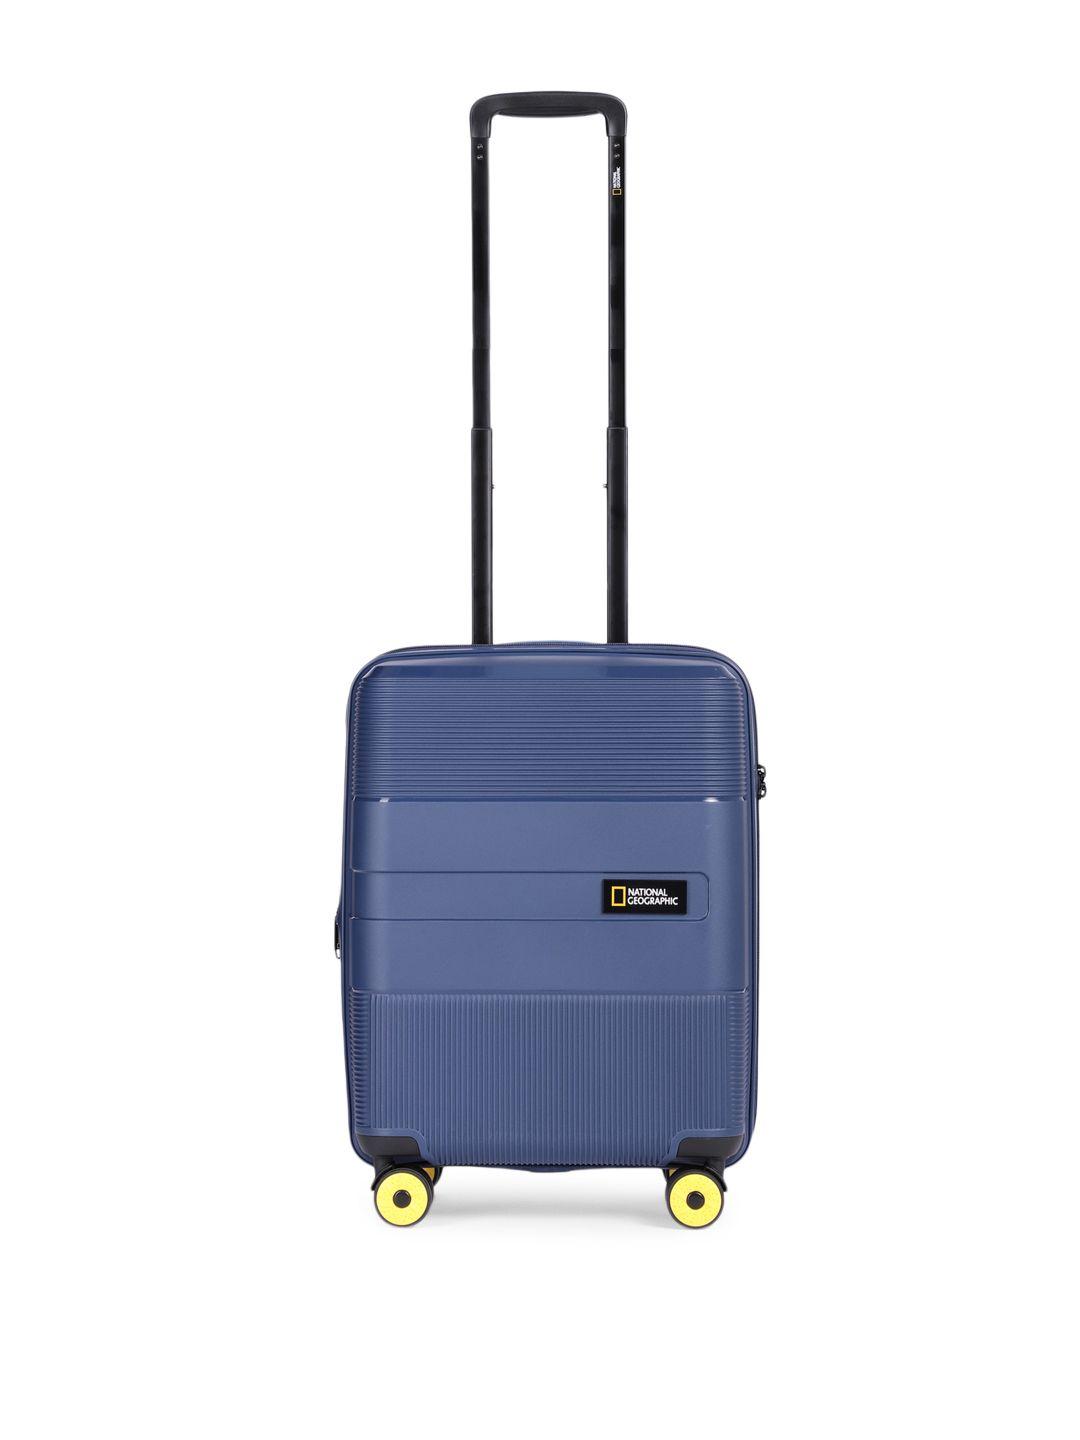 national geographic unisex solid 360-degree rotation cabin trolley bag - 55 cm